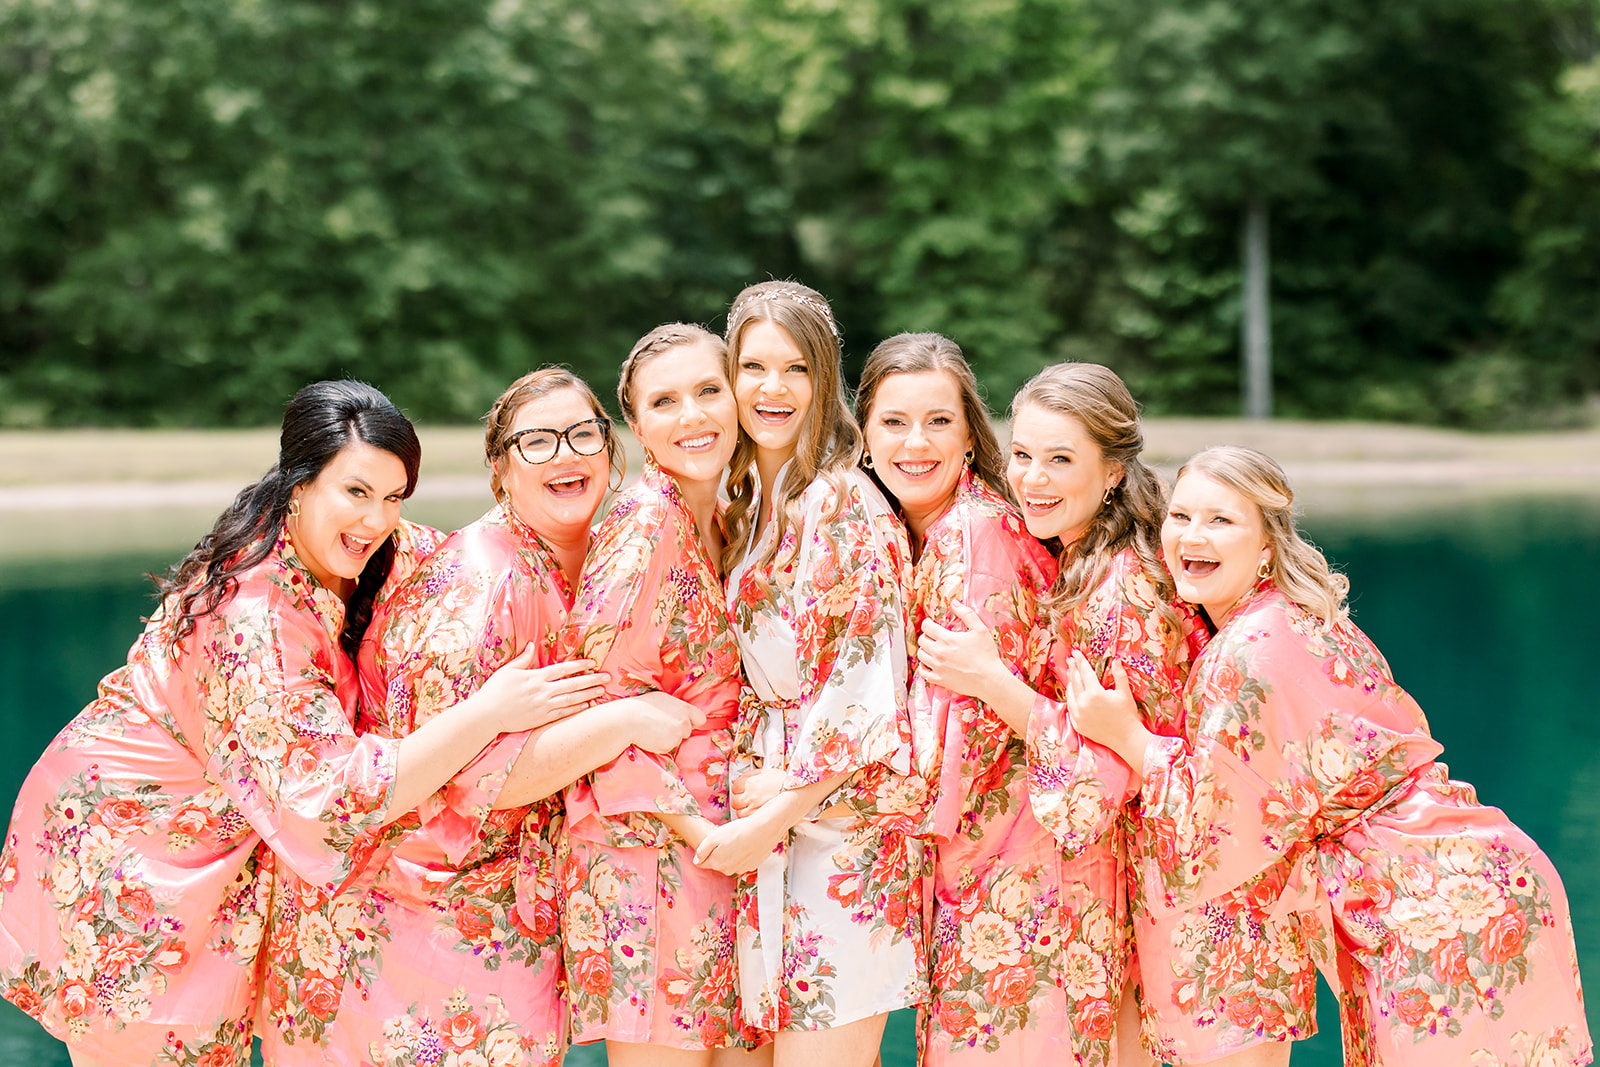 Bride and bridesmaids hugging in getting ready robes attire